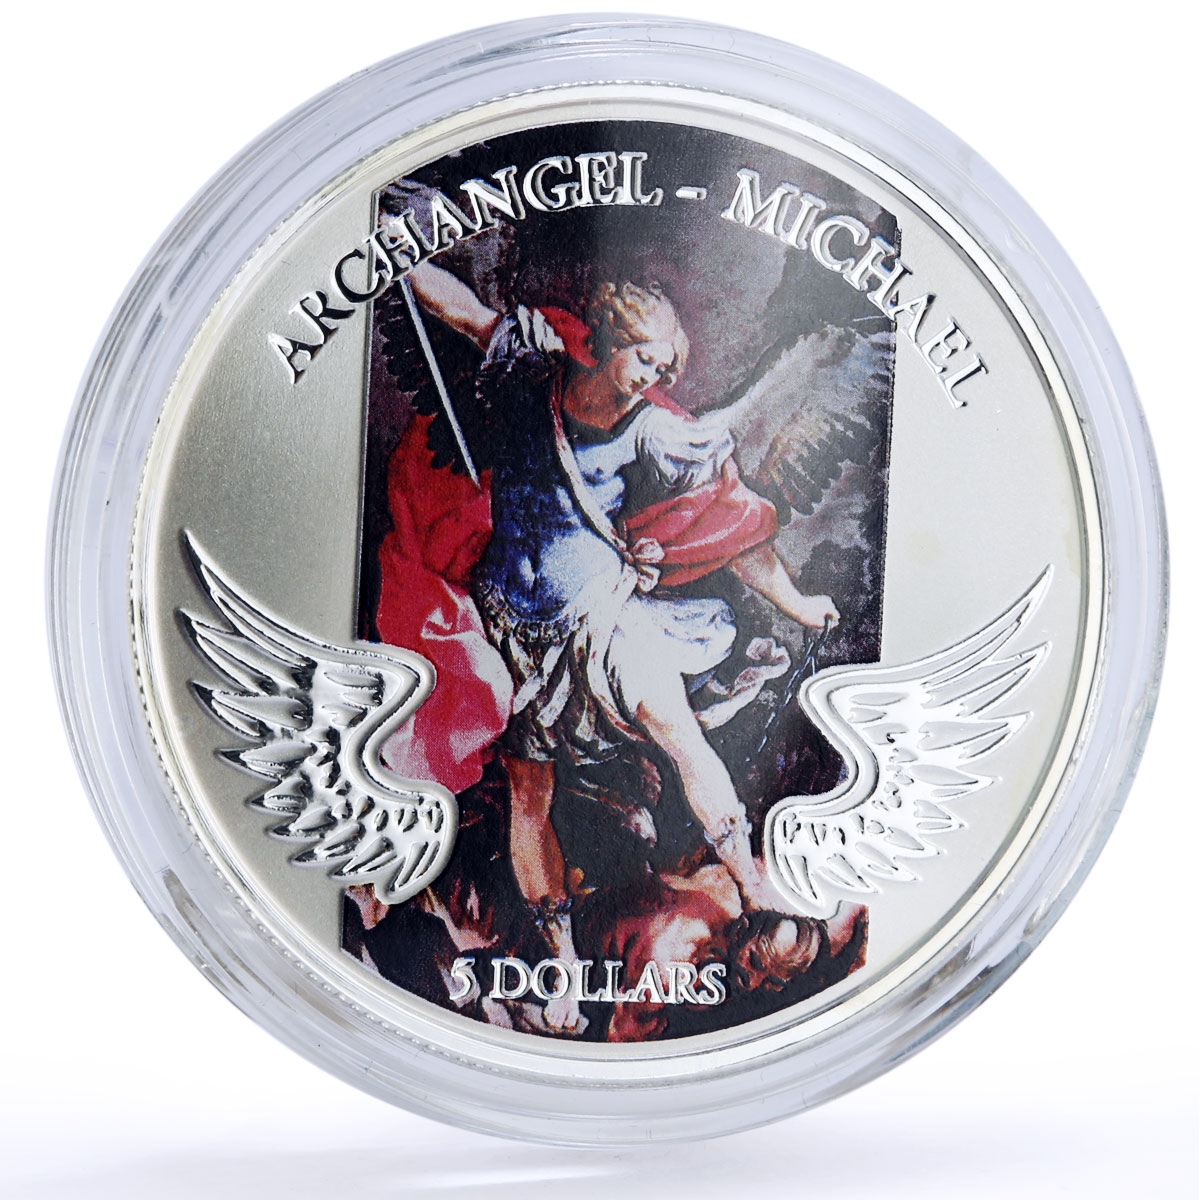 Solomon Islands 5 dollars Archangel Michael colored proof silver coin 2011